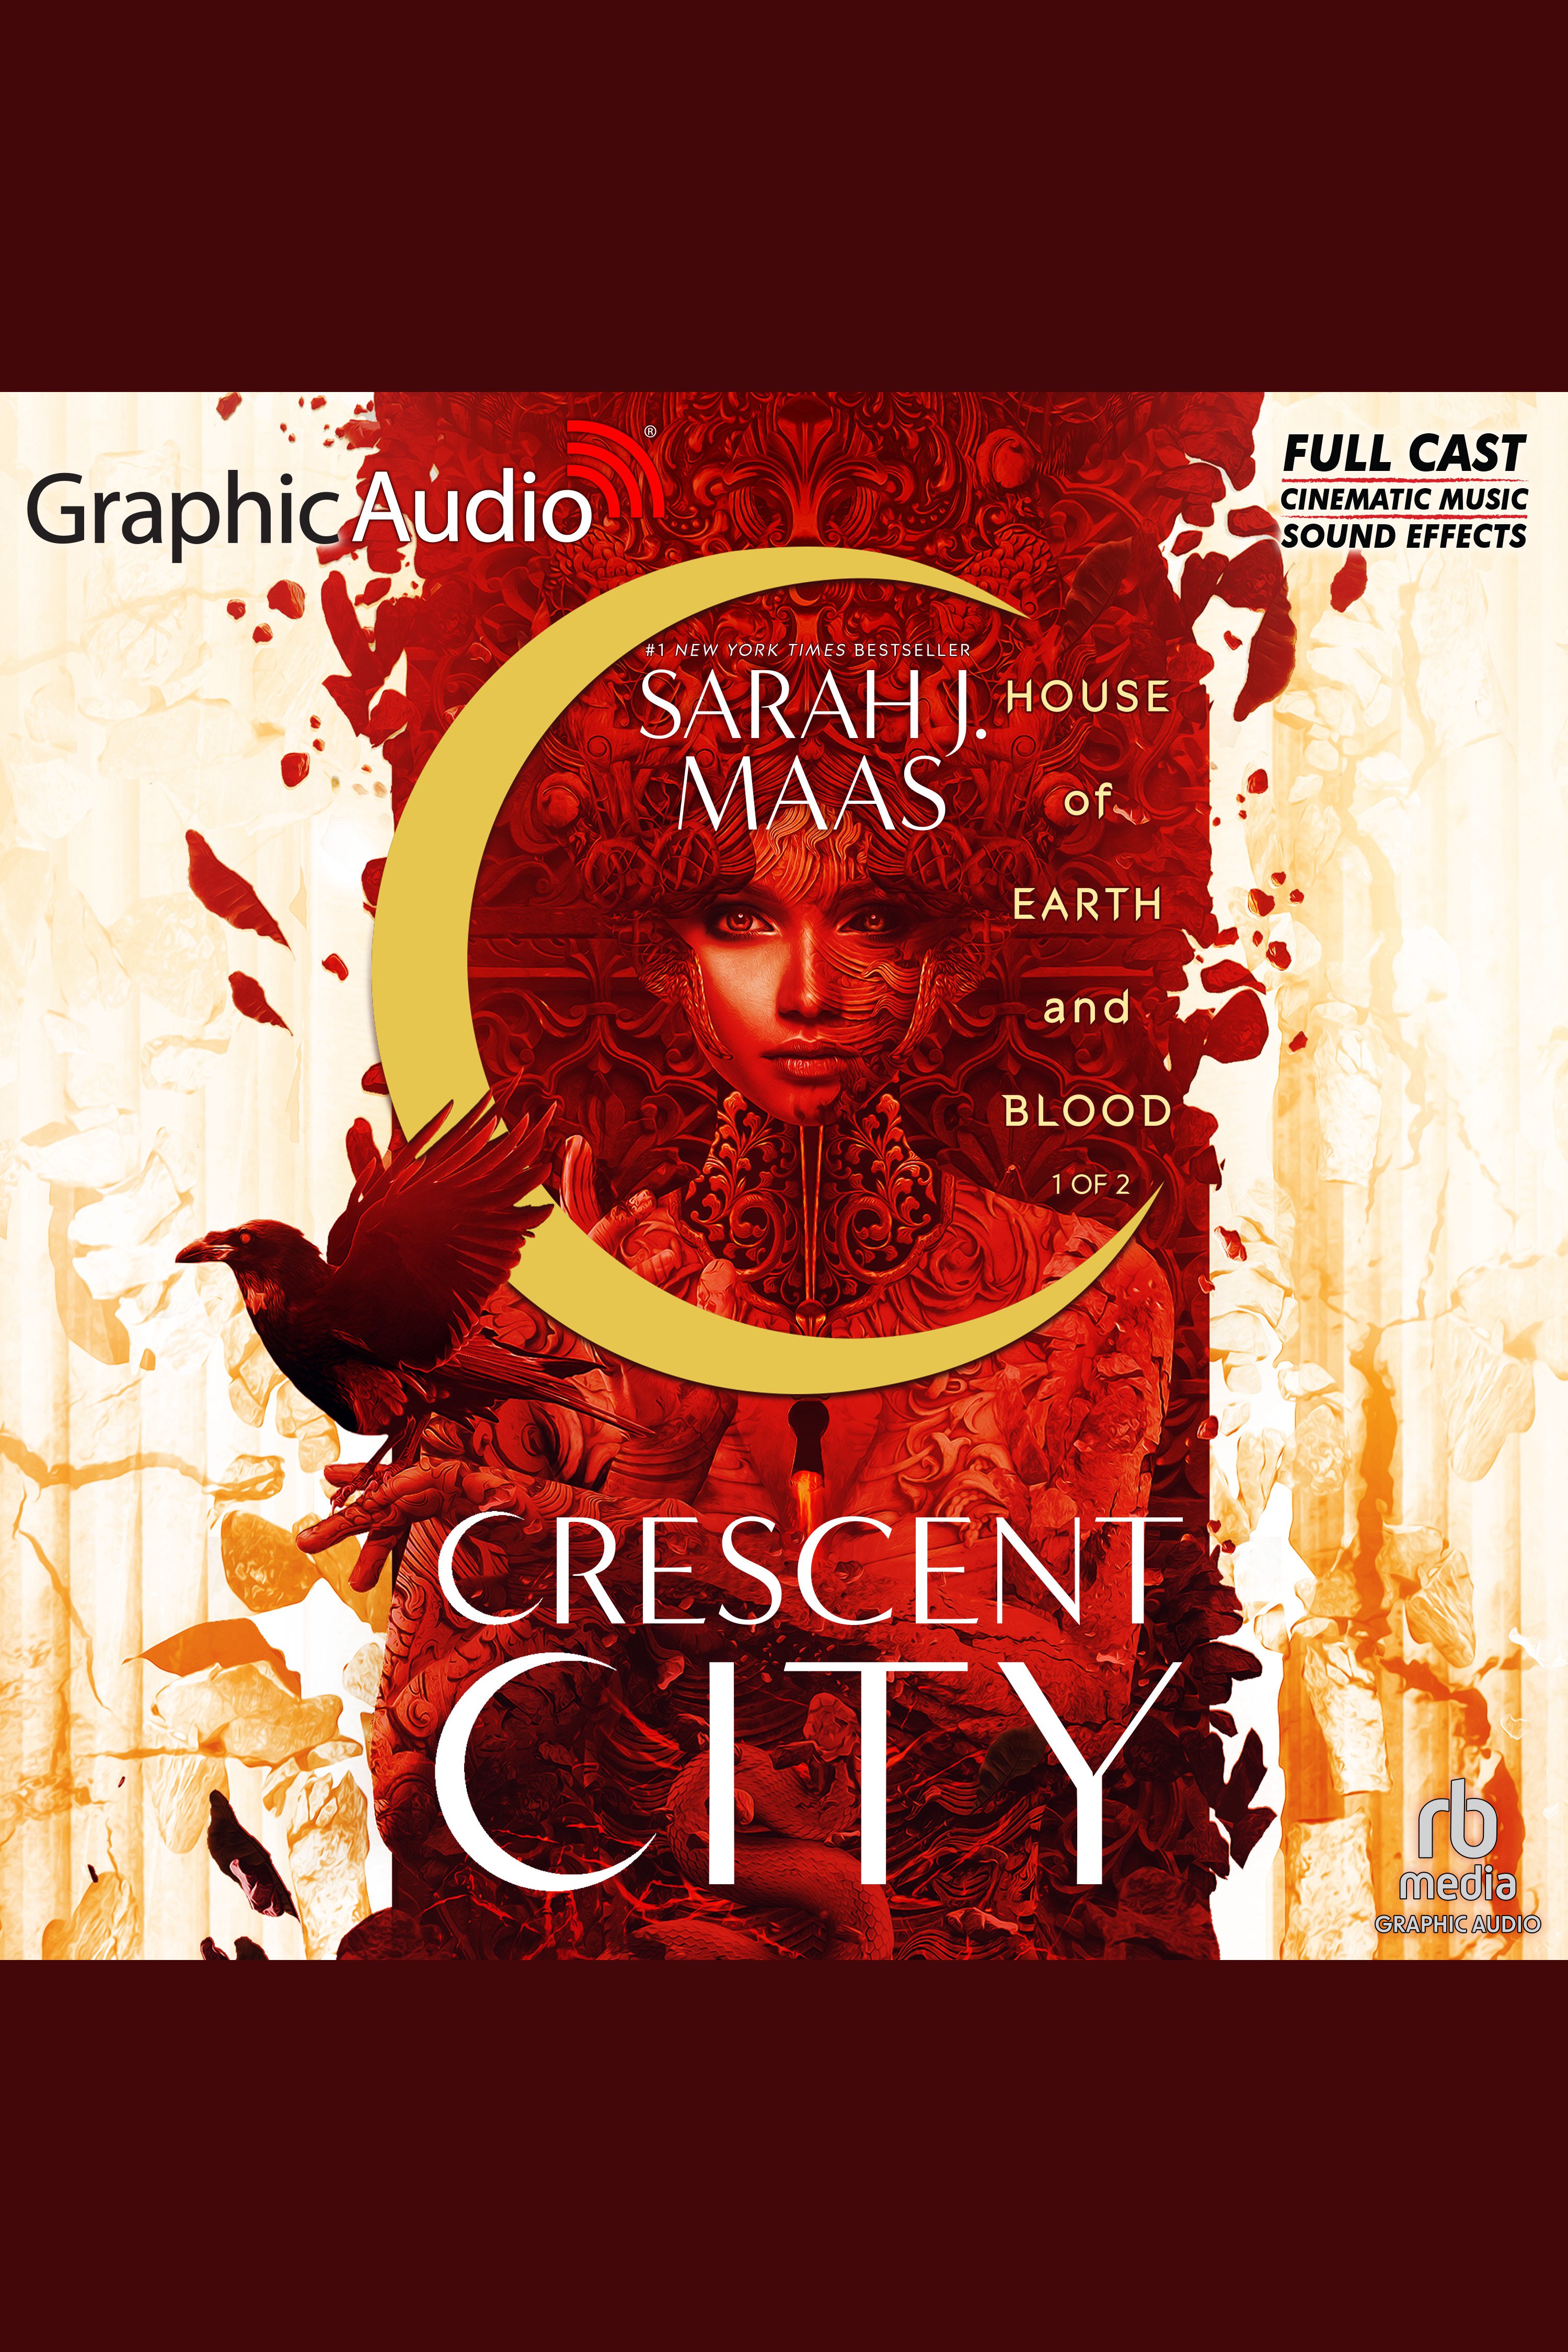 House of Earth and Blood (1 of 2) [Dramatized Adaptation] Crescent City 1 cover image